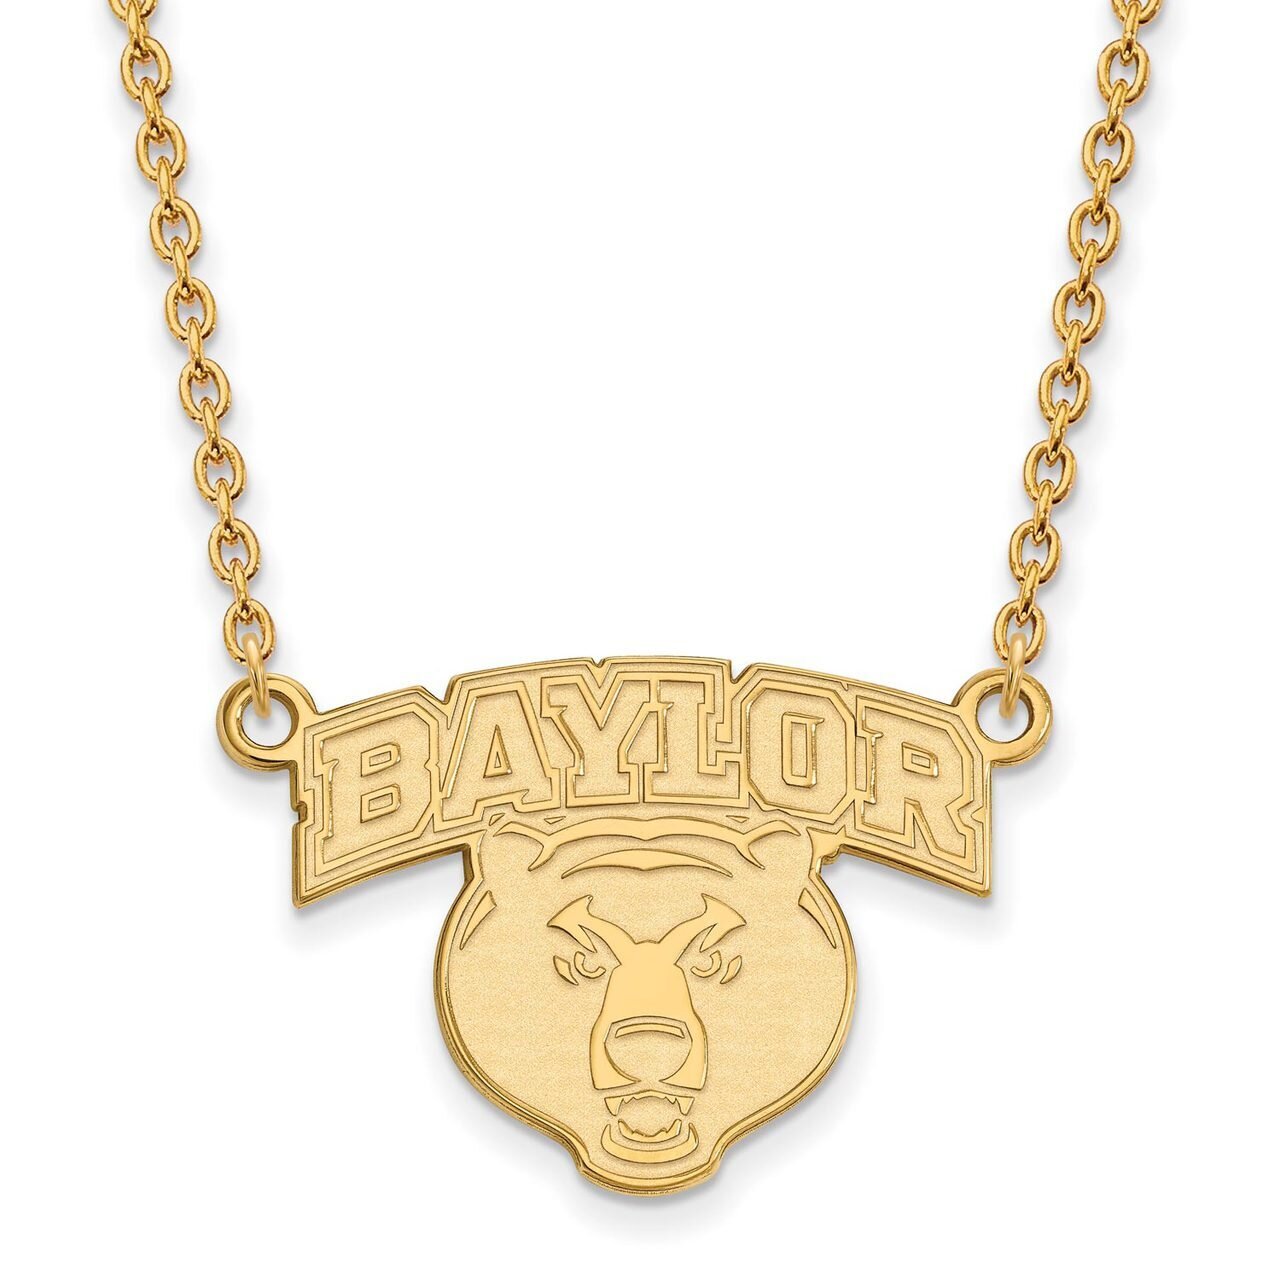 Baylor University Large Pendant with Chain Necklace 10k Yellow Gold 1Y031BU-18